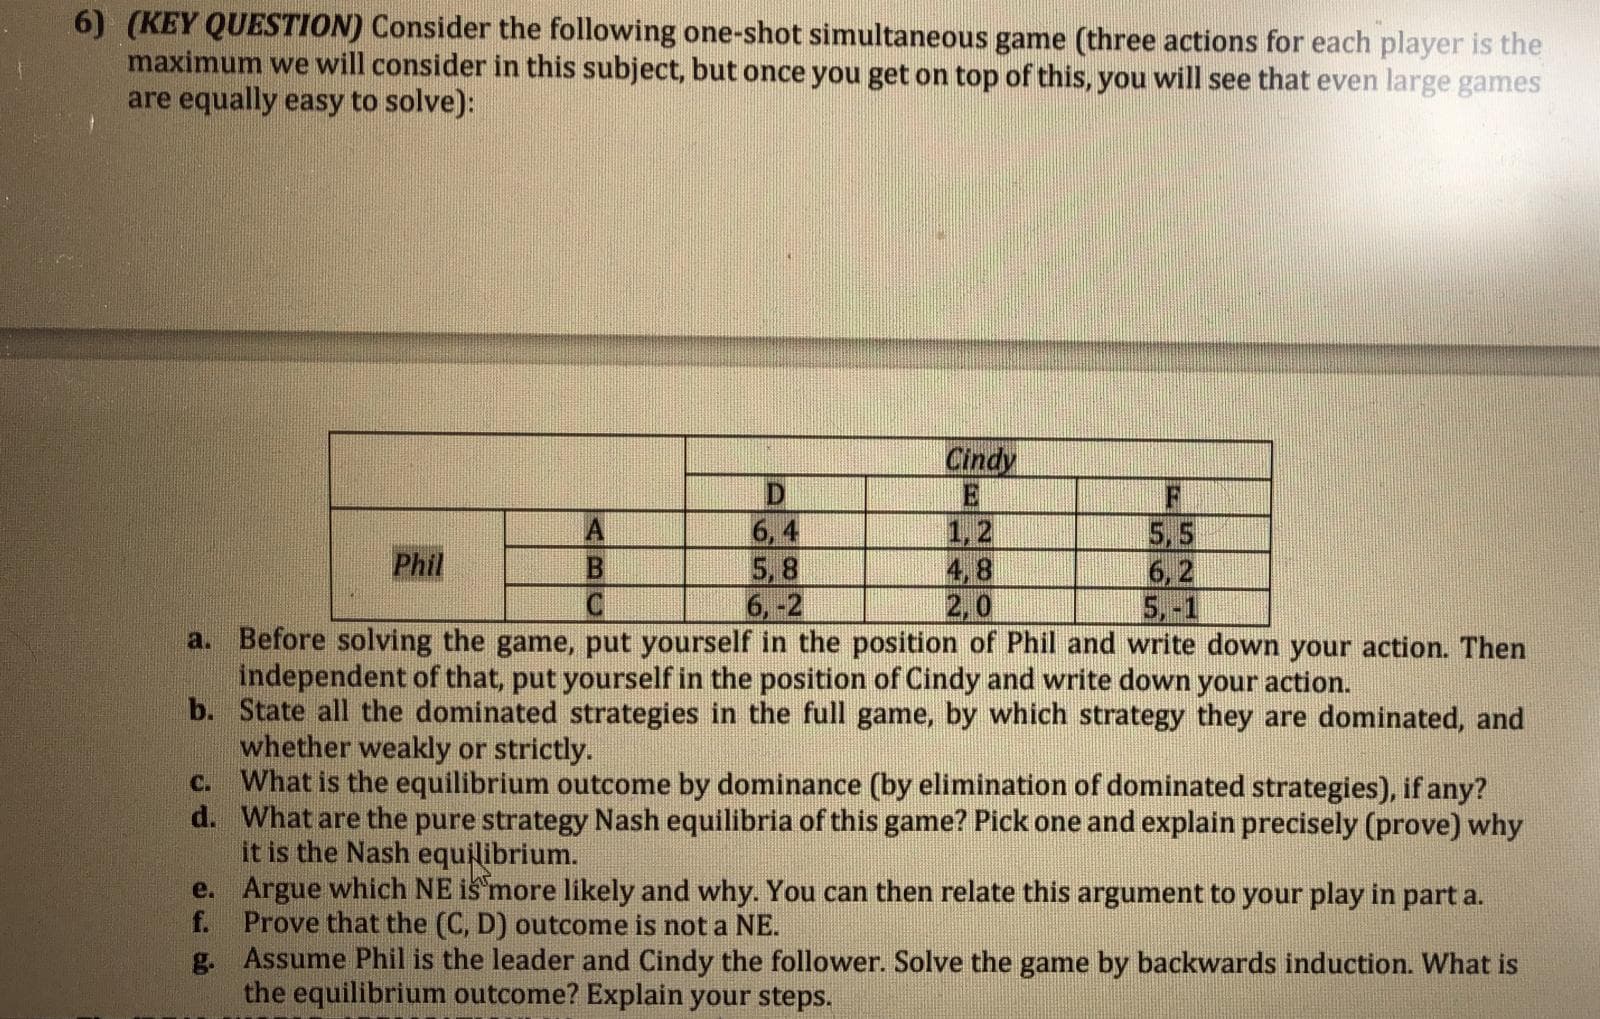 by
ategles), if any?
d. What are the pure strategy Nash equilibria of this game? Pick one and explain precisely (prove) why
it is the Nash equilibrium.
e. Argue which NE is more likely and why. You can then relate this argument to your play in part a.
f. Prove that the (C, D) outcome is not a NE.
